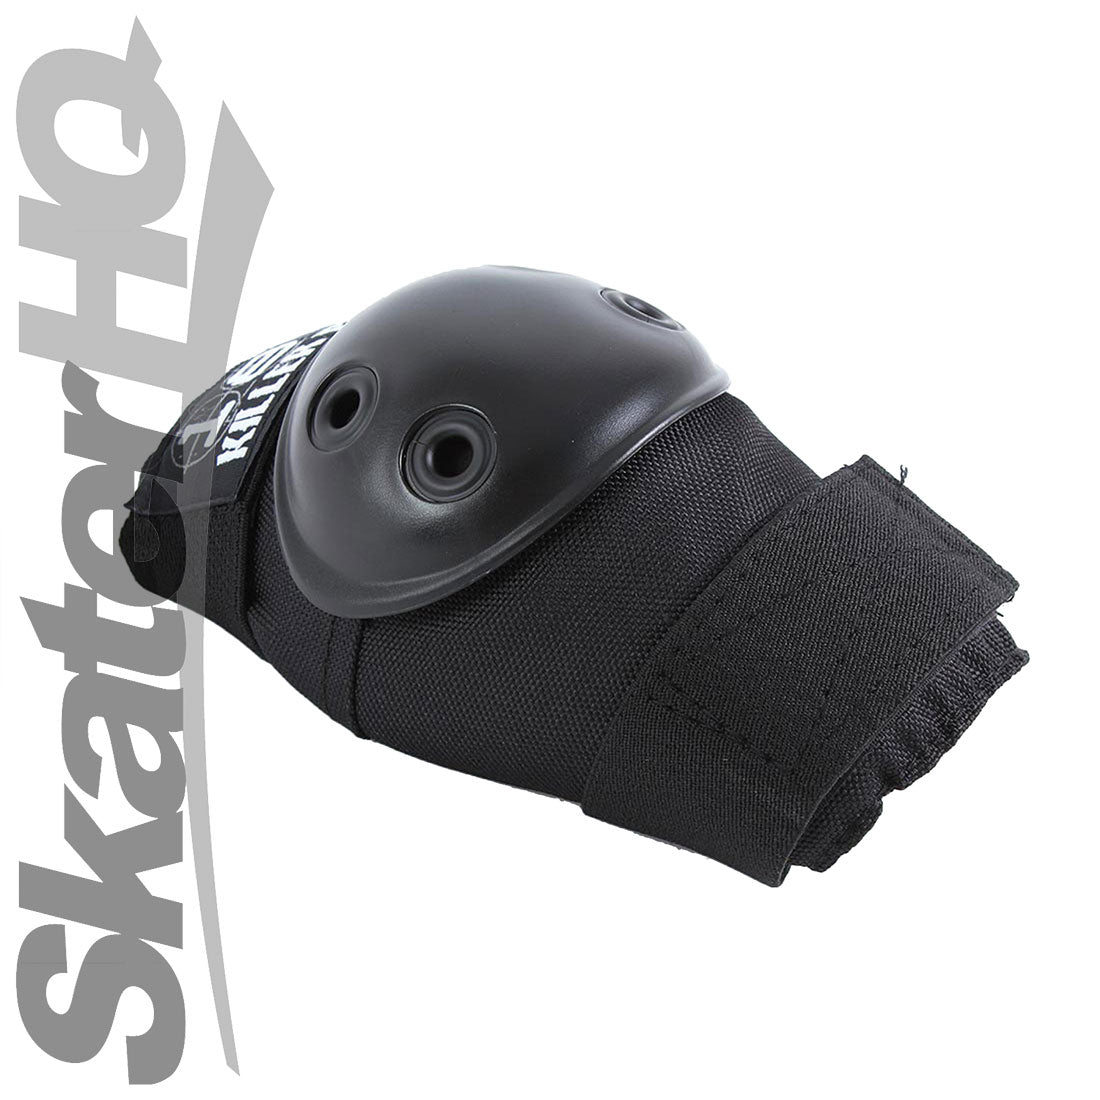 187 Elbow Pads - Black Protective Gear